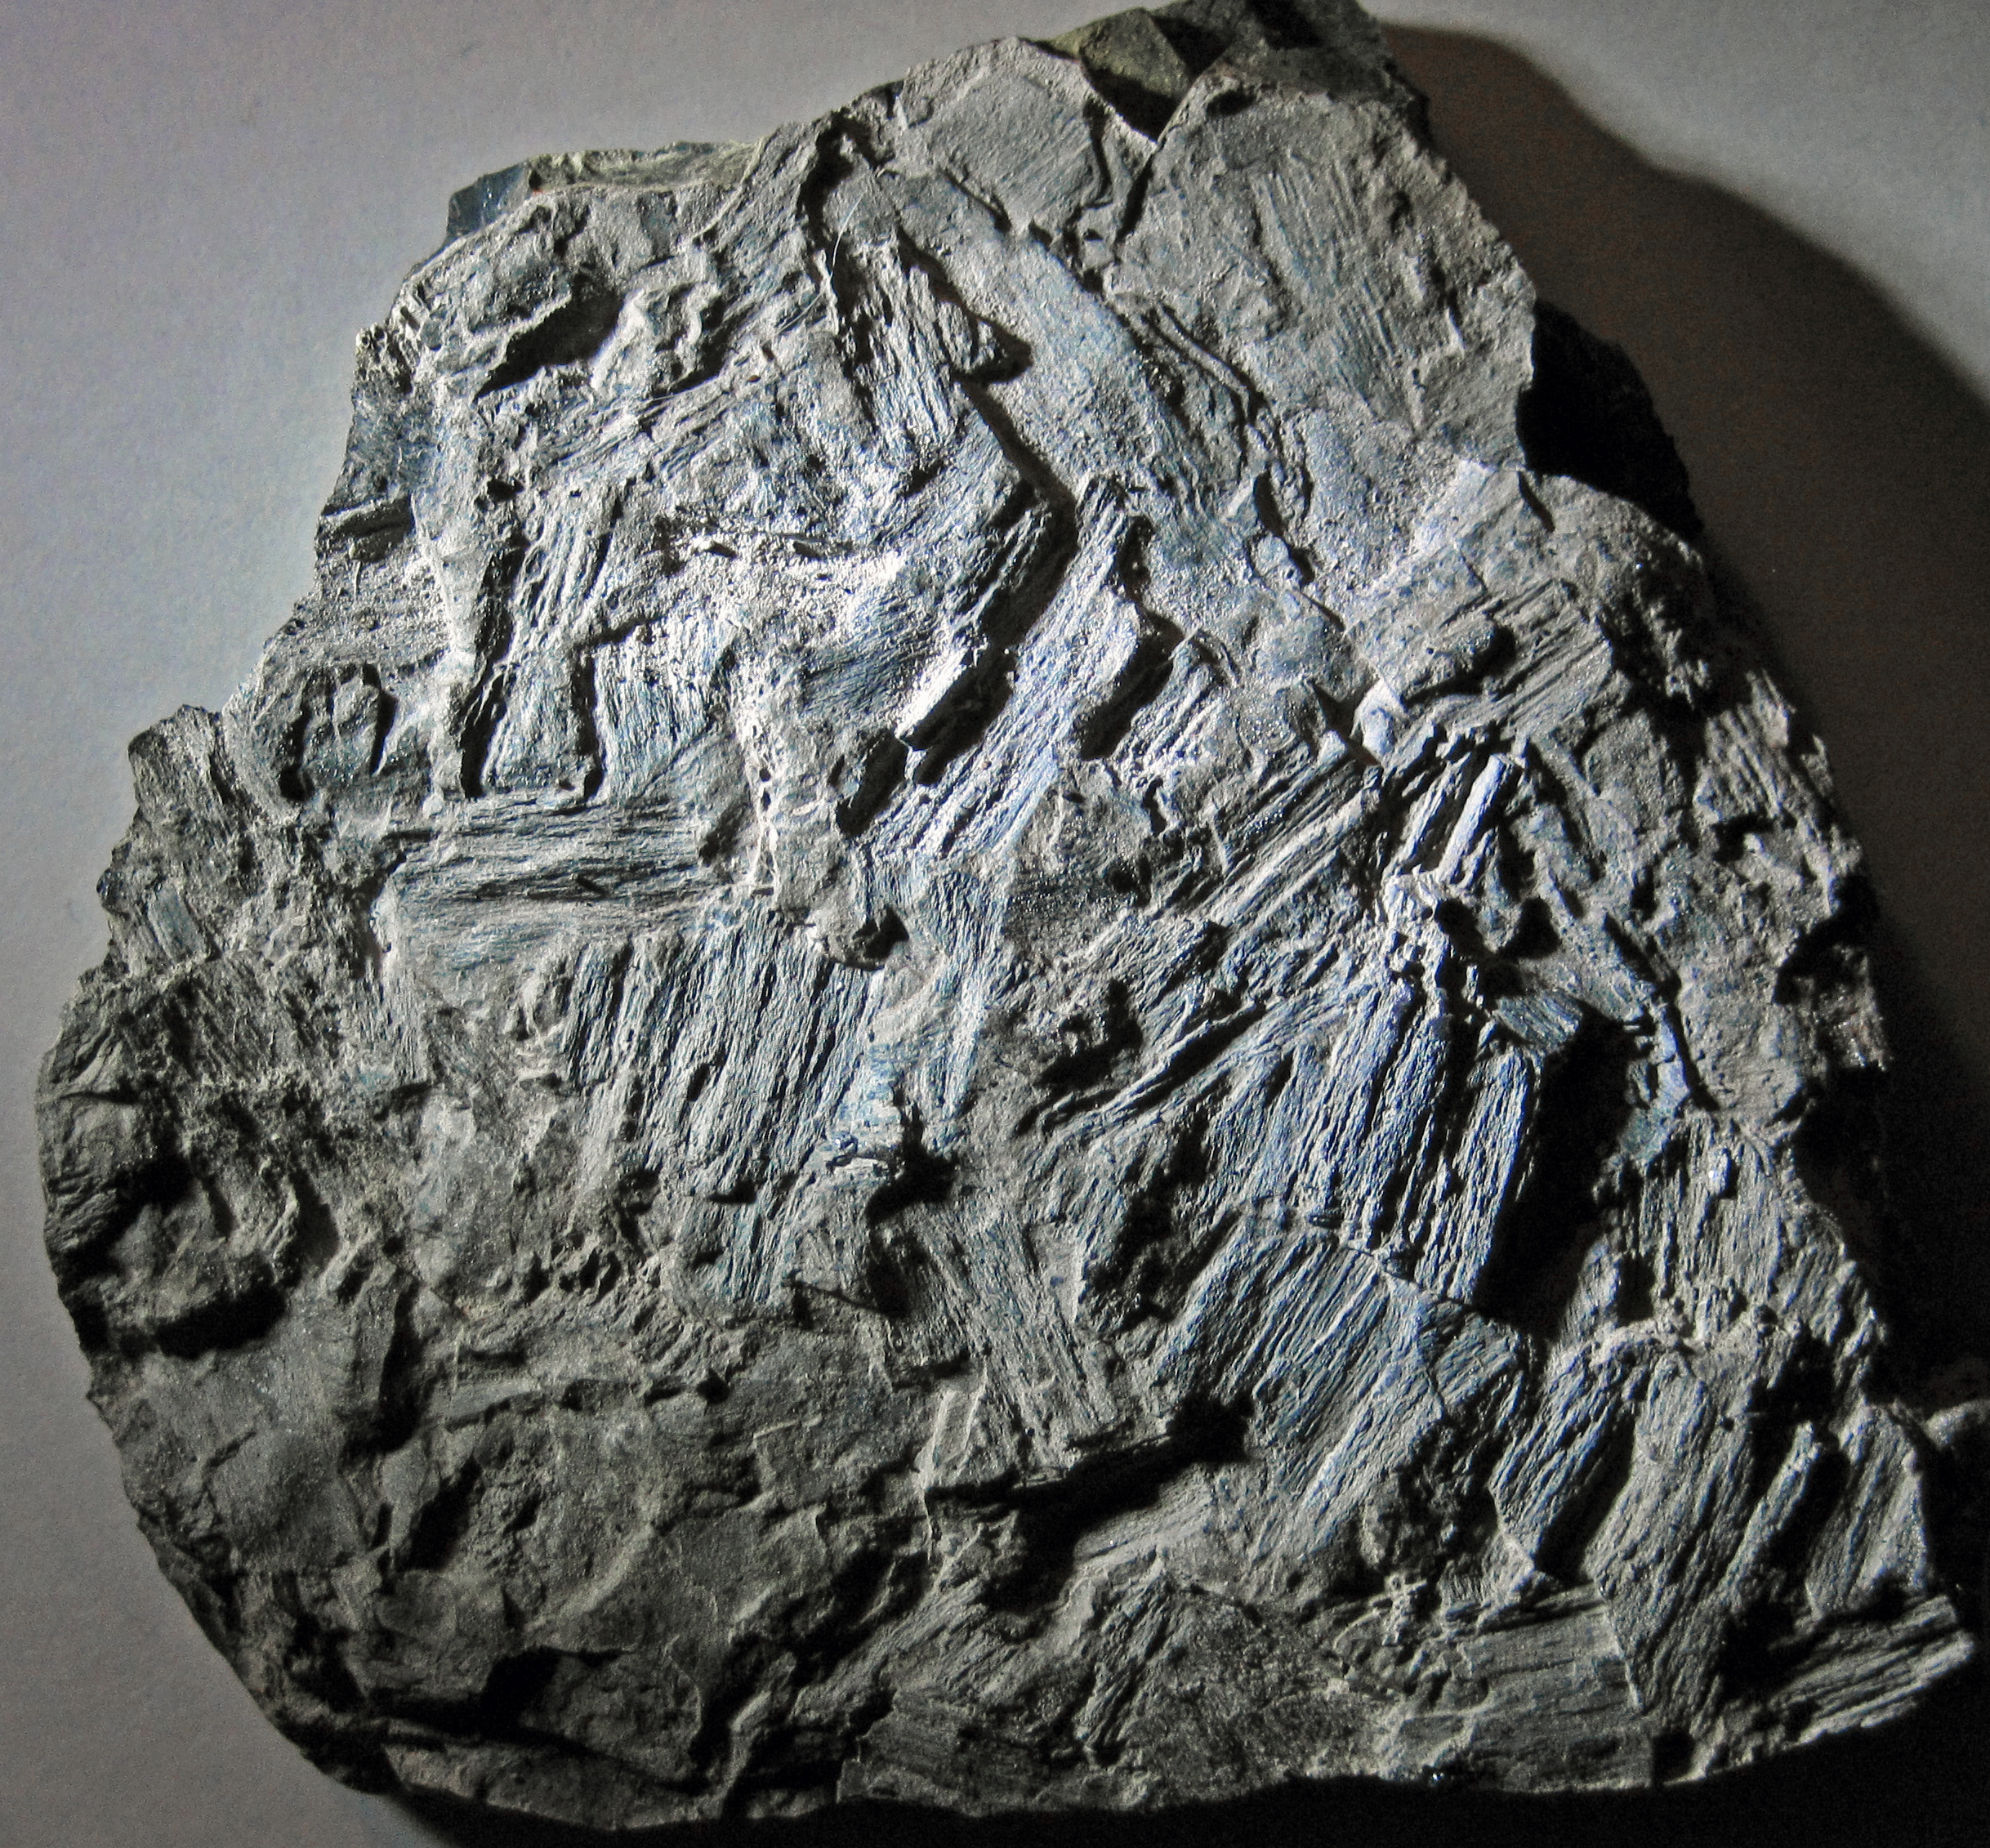 Fossil charcoal in weathered coal